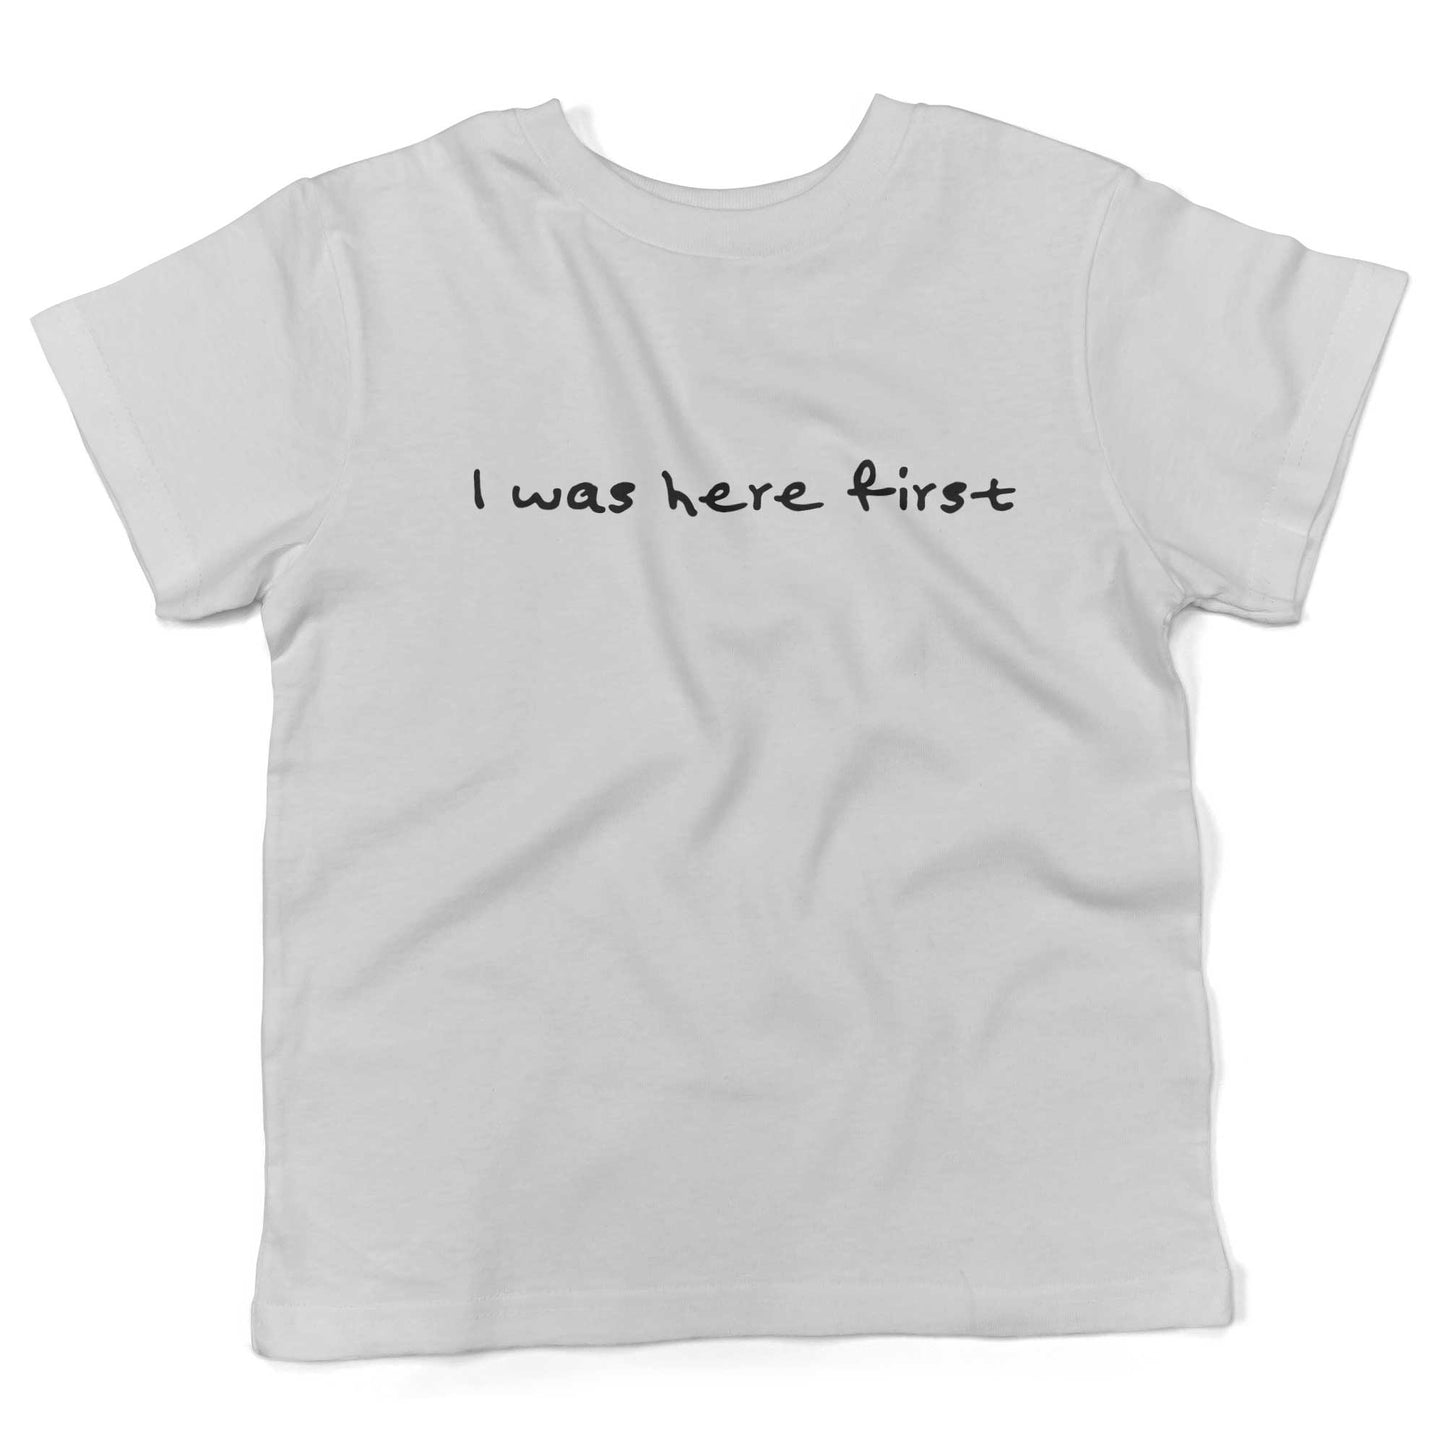 I Was Here First Toddler Shirt-White-2T